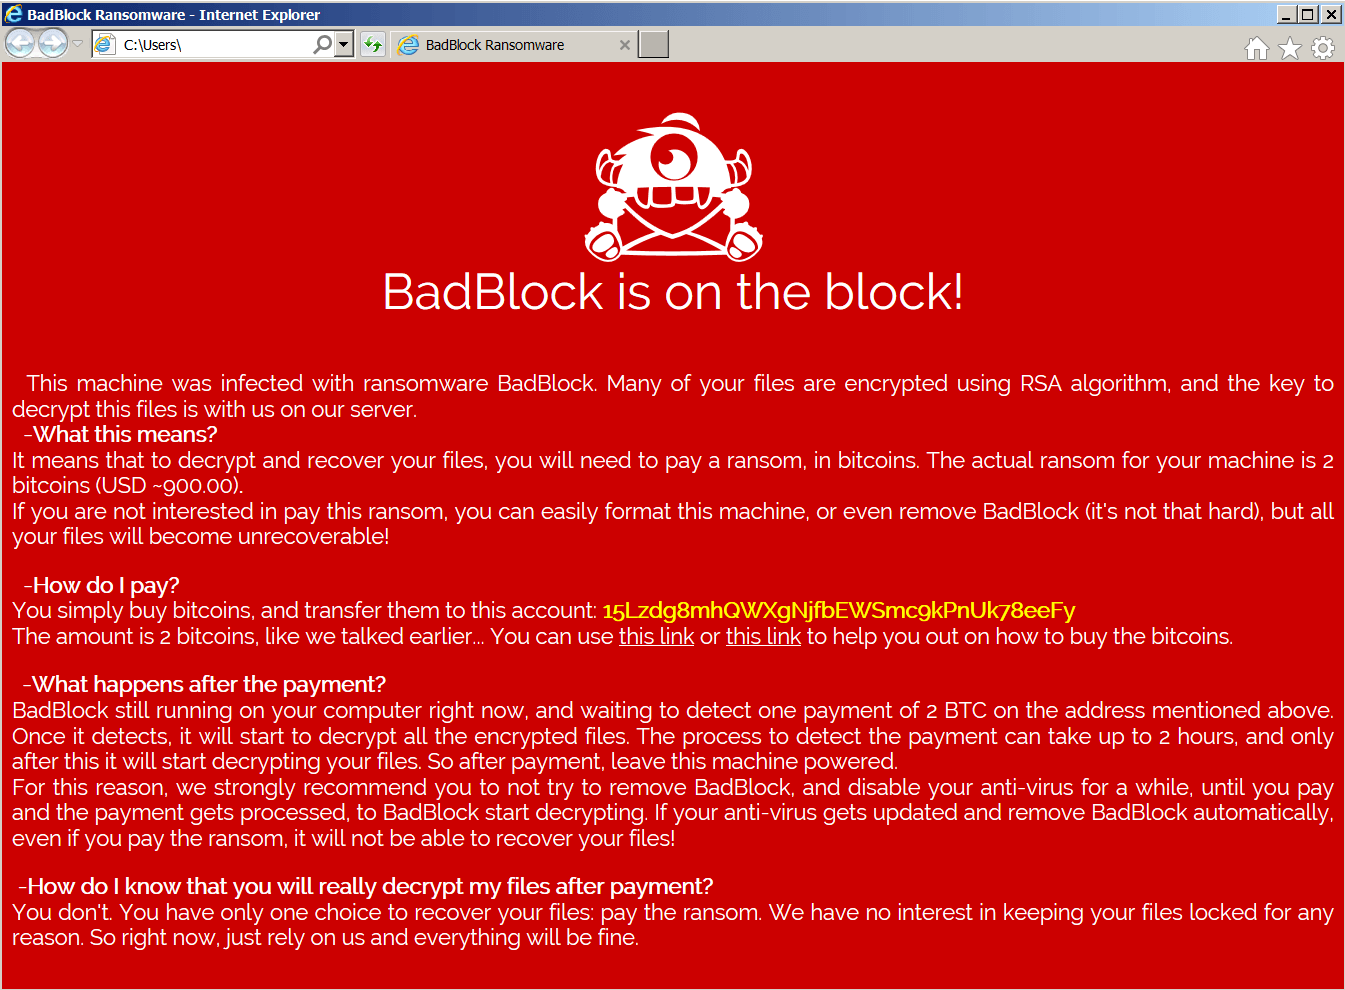 Roblox Game Pass store used to sell ransomware decryptor